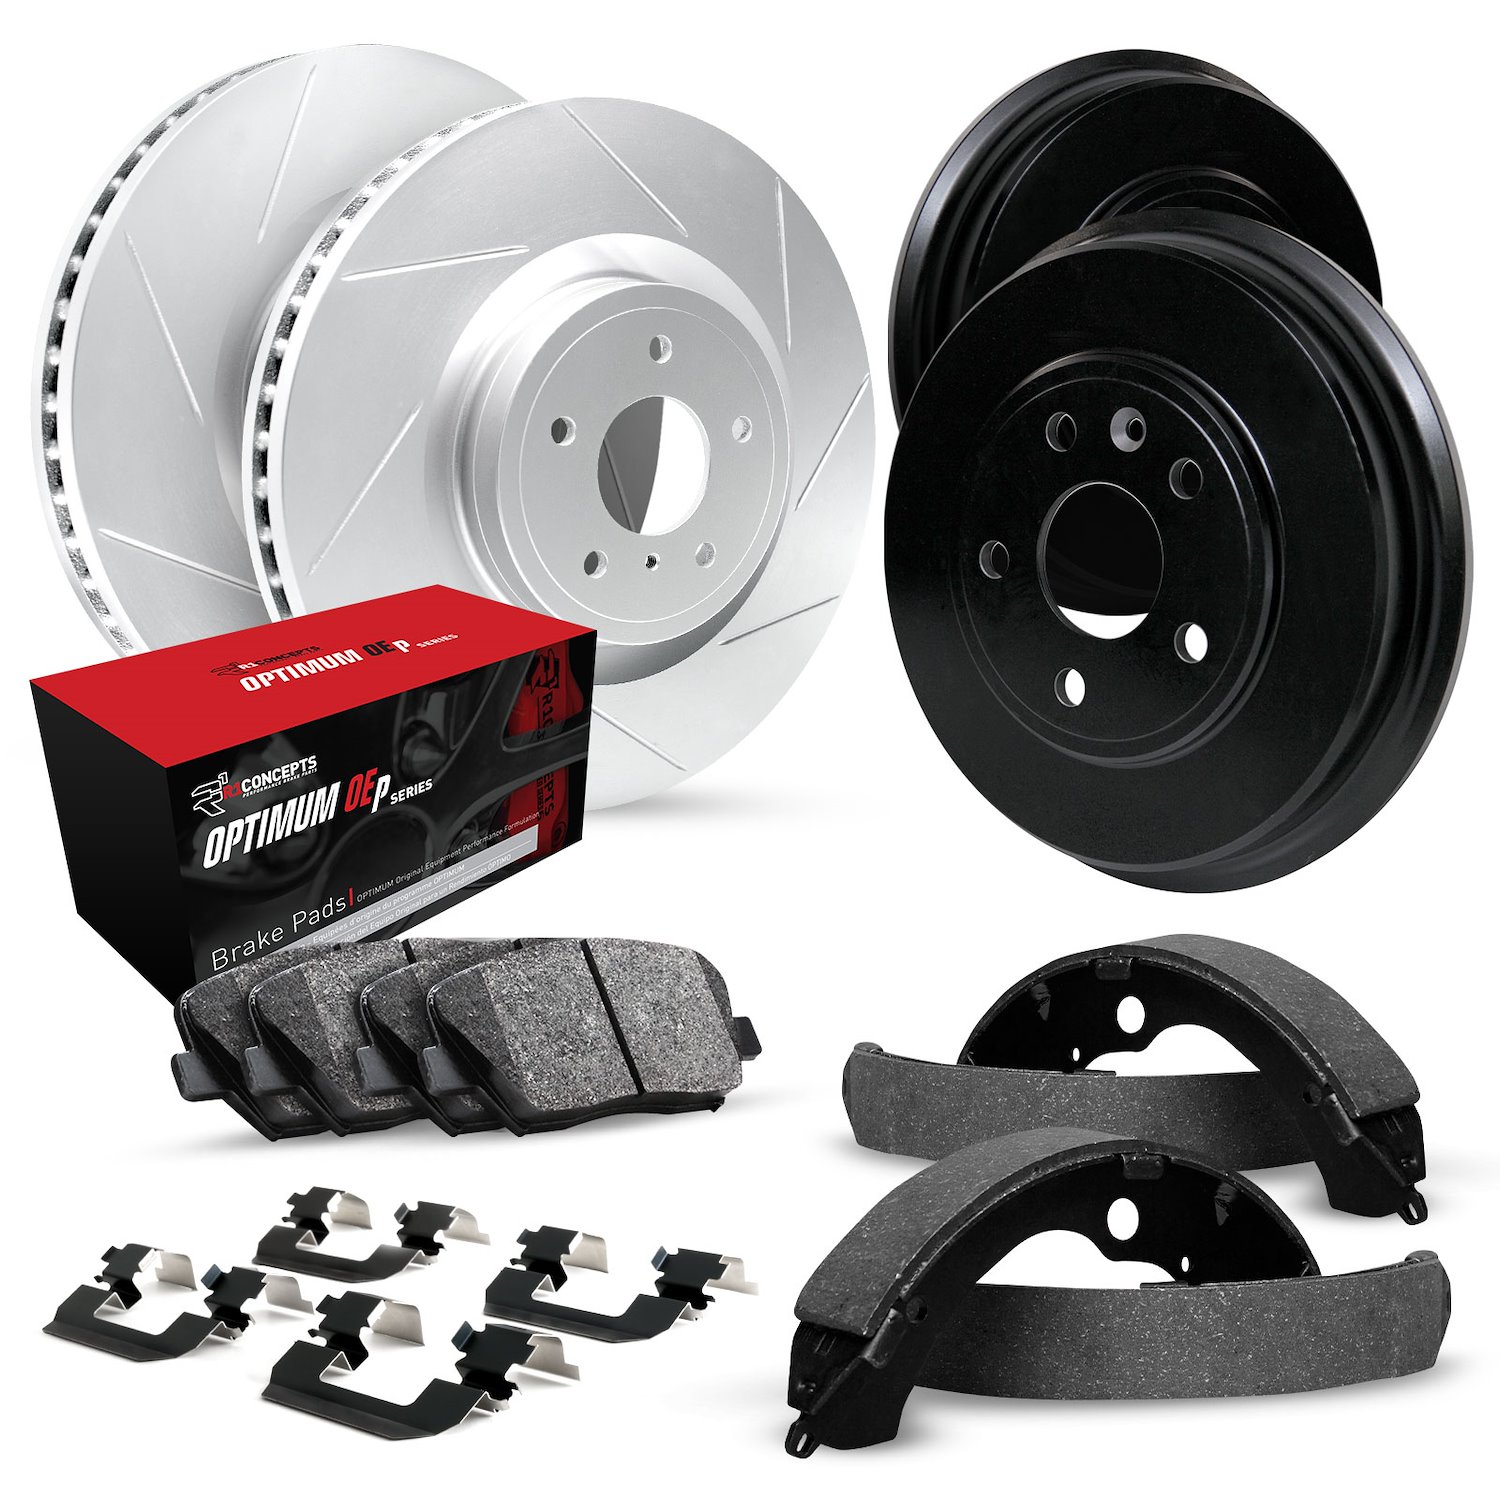 GEO-Carbon Slotted Brake Rotor & Drum Set w/Optimum OE Pads, Shoes, & Hardware, 1992-1998 Ford/Lincoln/Mercury/Mazda